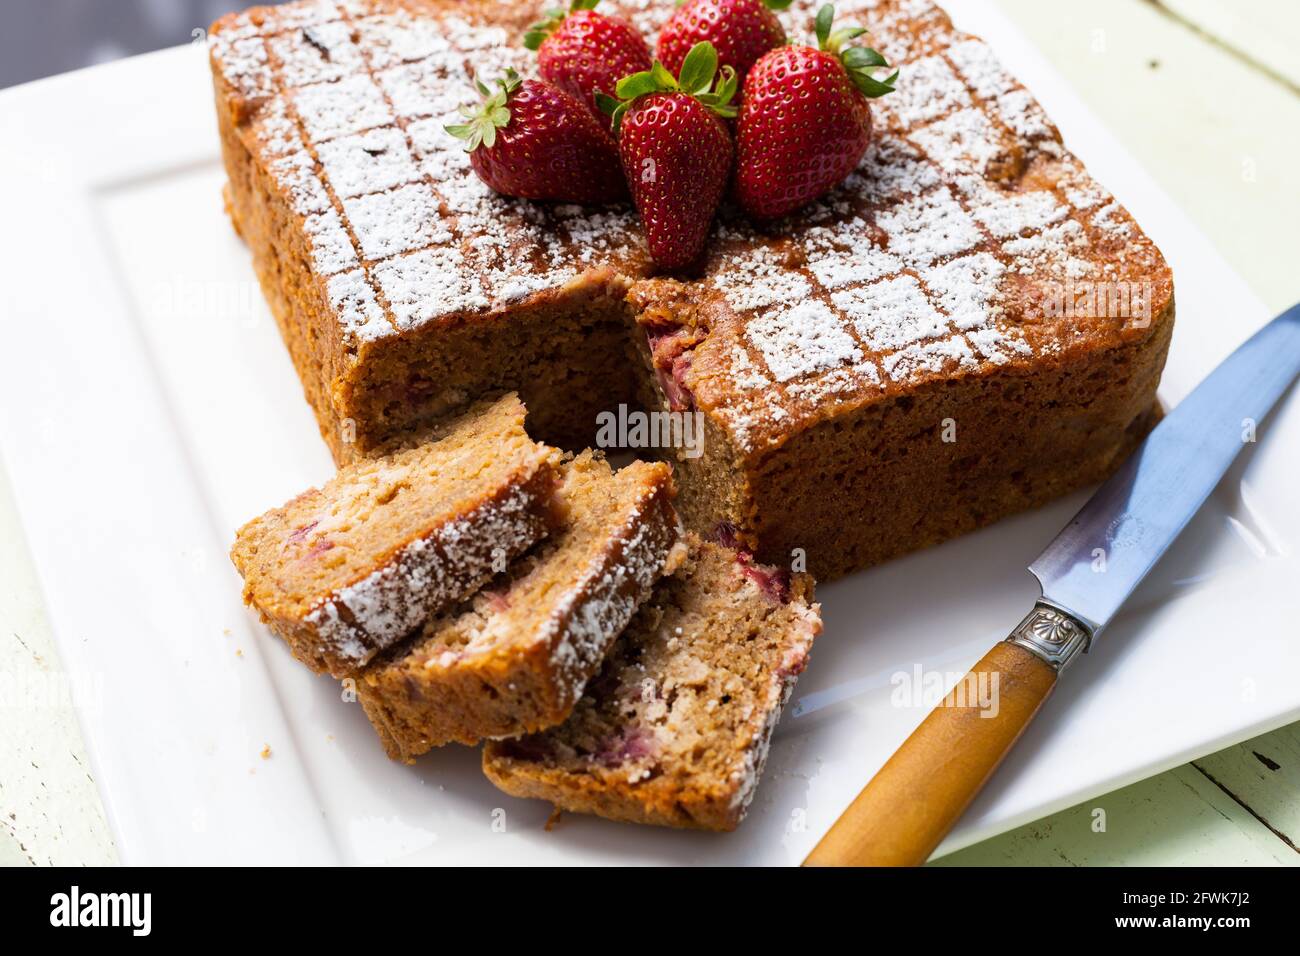 Square cake with slices and knife on white plate with strawberries on top Stock Photo